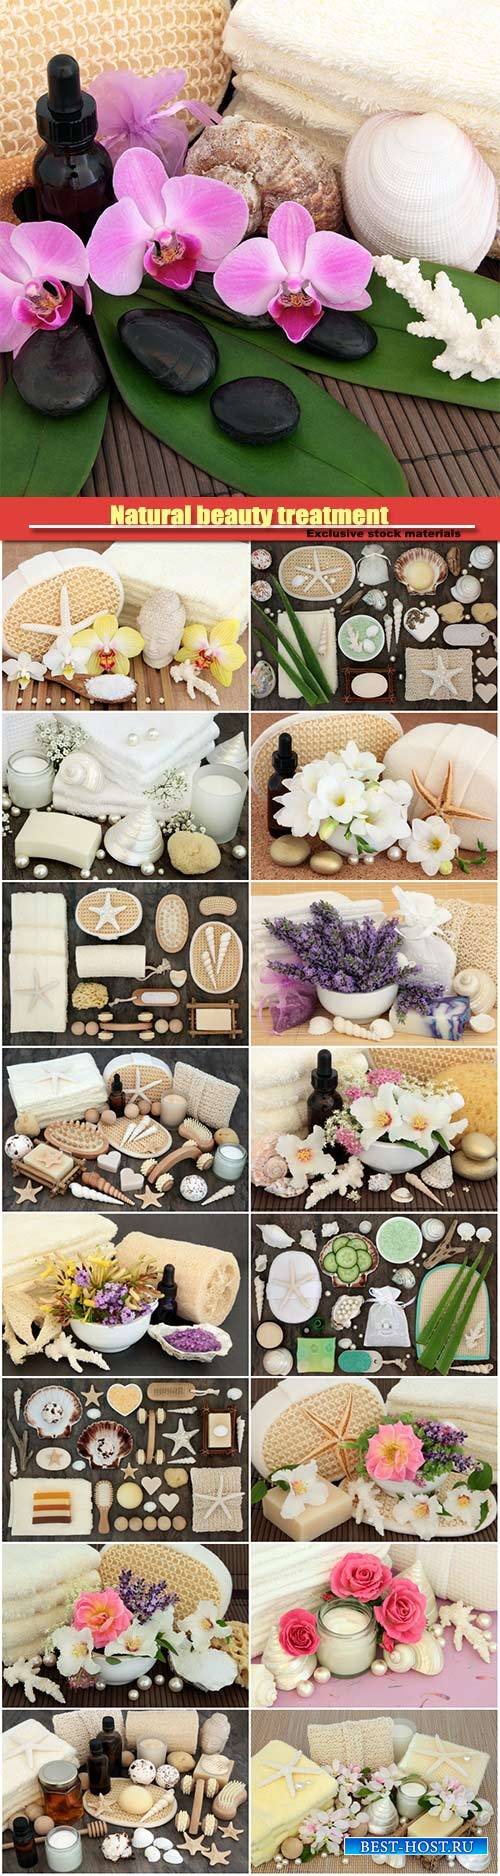 Natural beauty treatment, spa massage accessories, lavender and honeysuckle